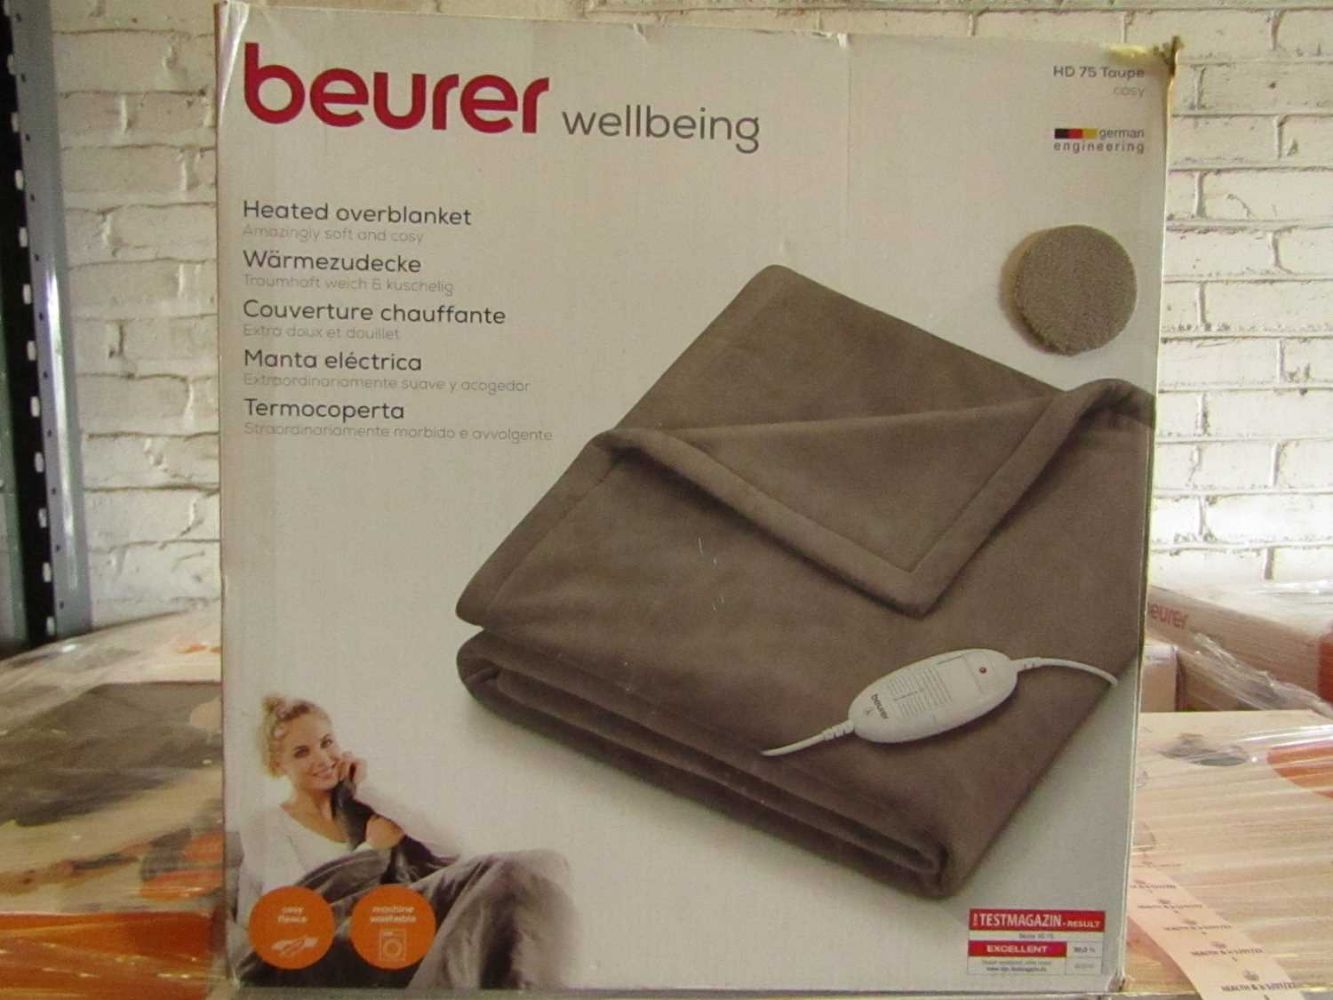 Electricals From baurer Health & Wellbeing - Heated Throws, Infrared Lamps, Scales, Foot Spa's & Much More!